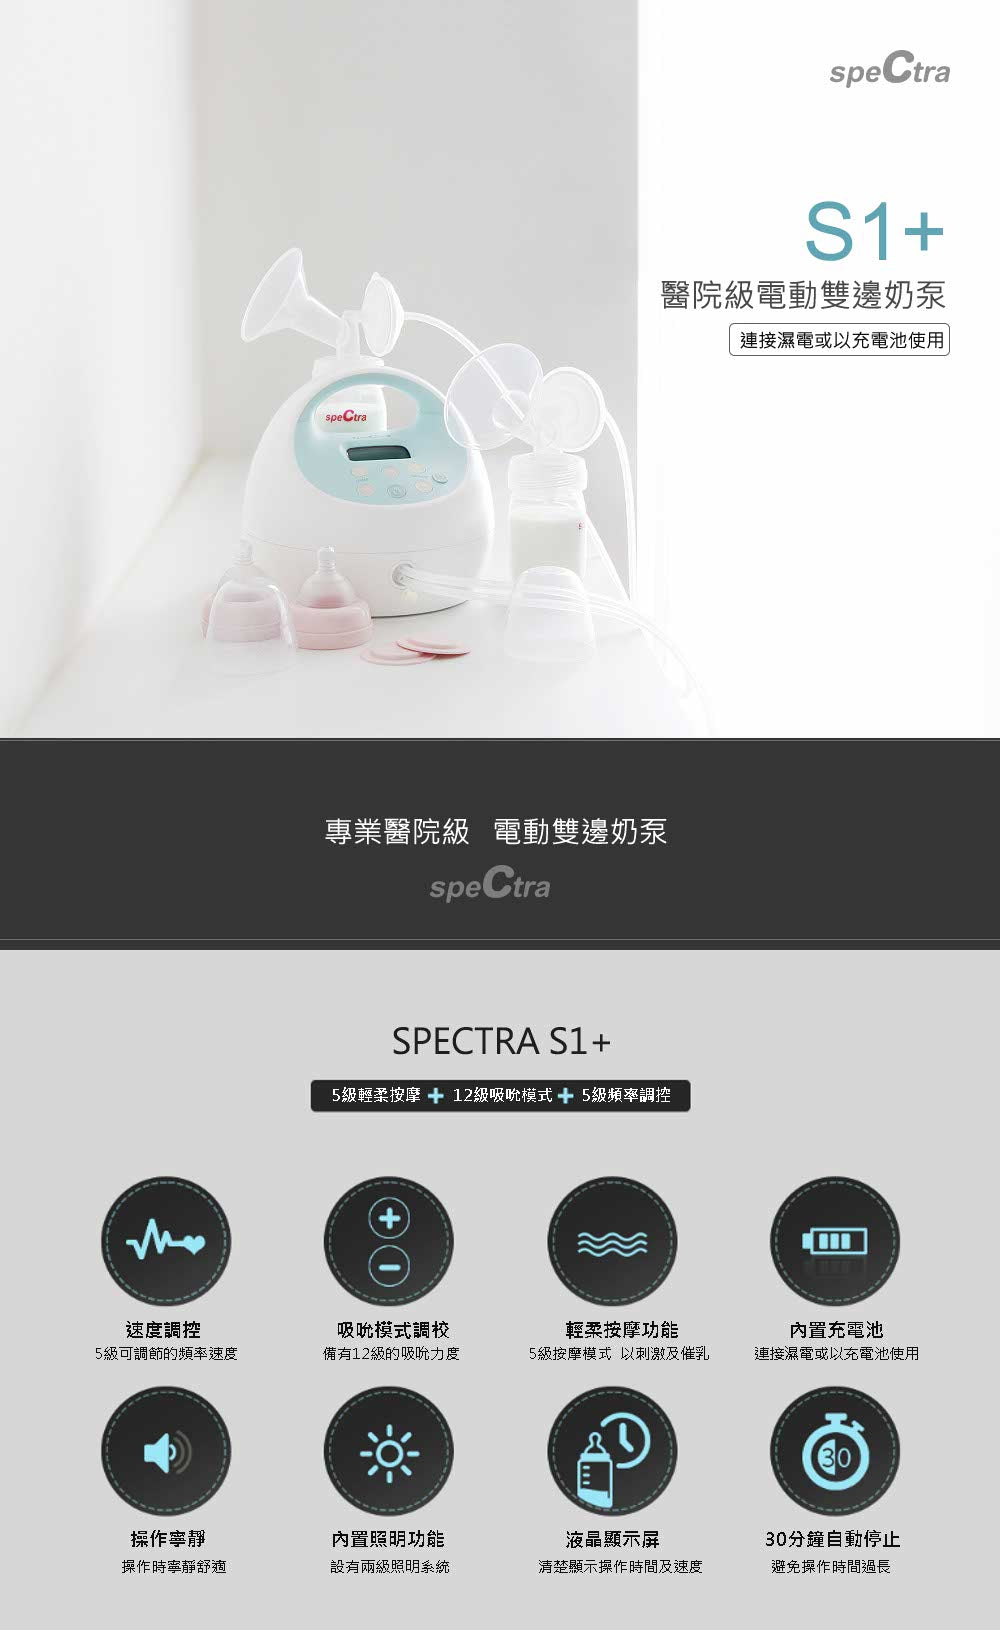 【Mother's Day Special】SPECTRA S1+ Rechargeable Hospital Grade Double Breastpump